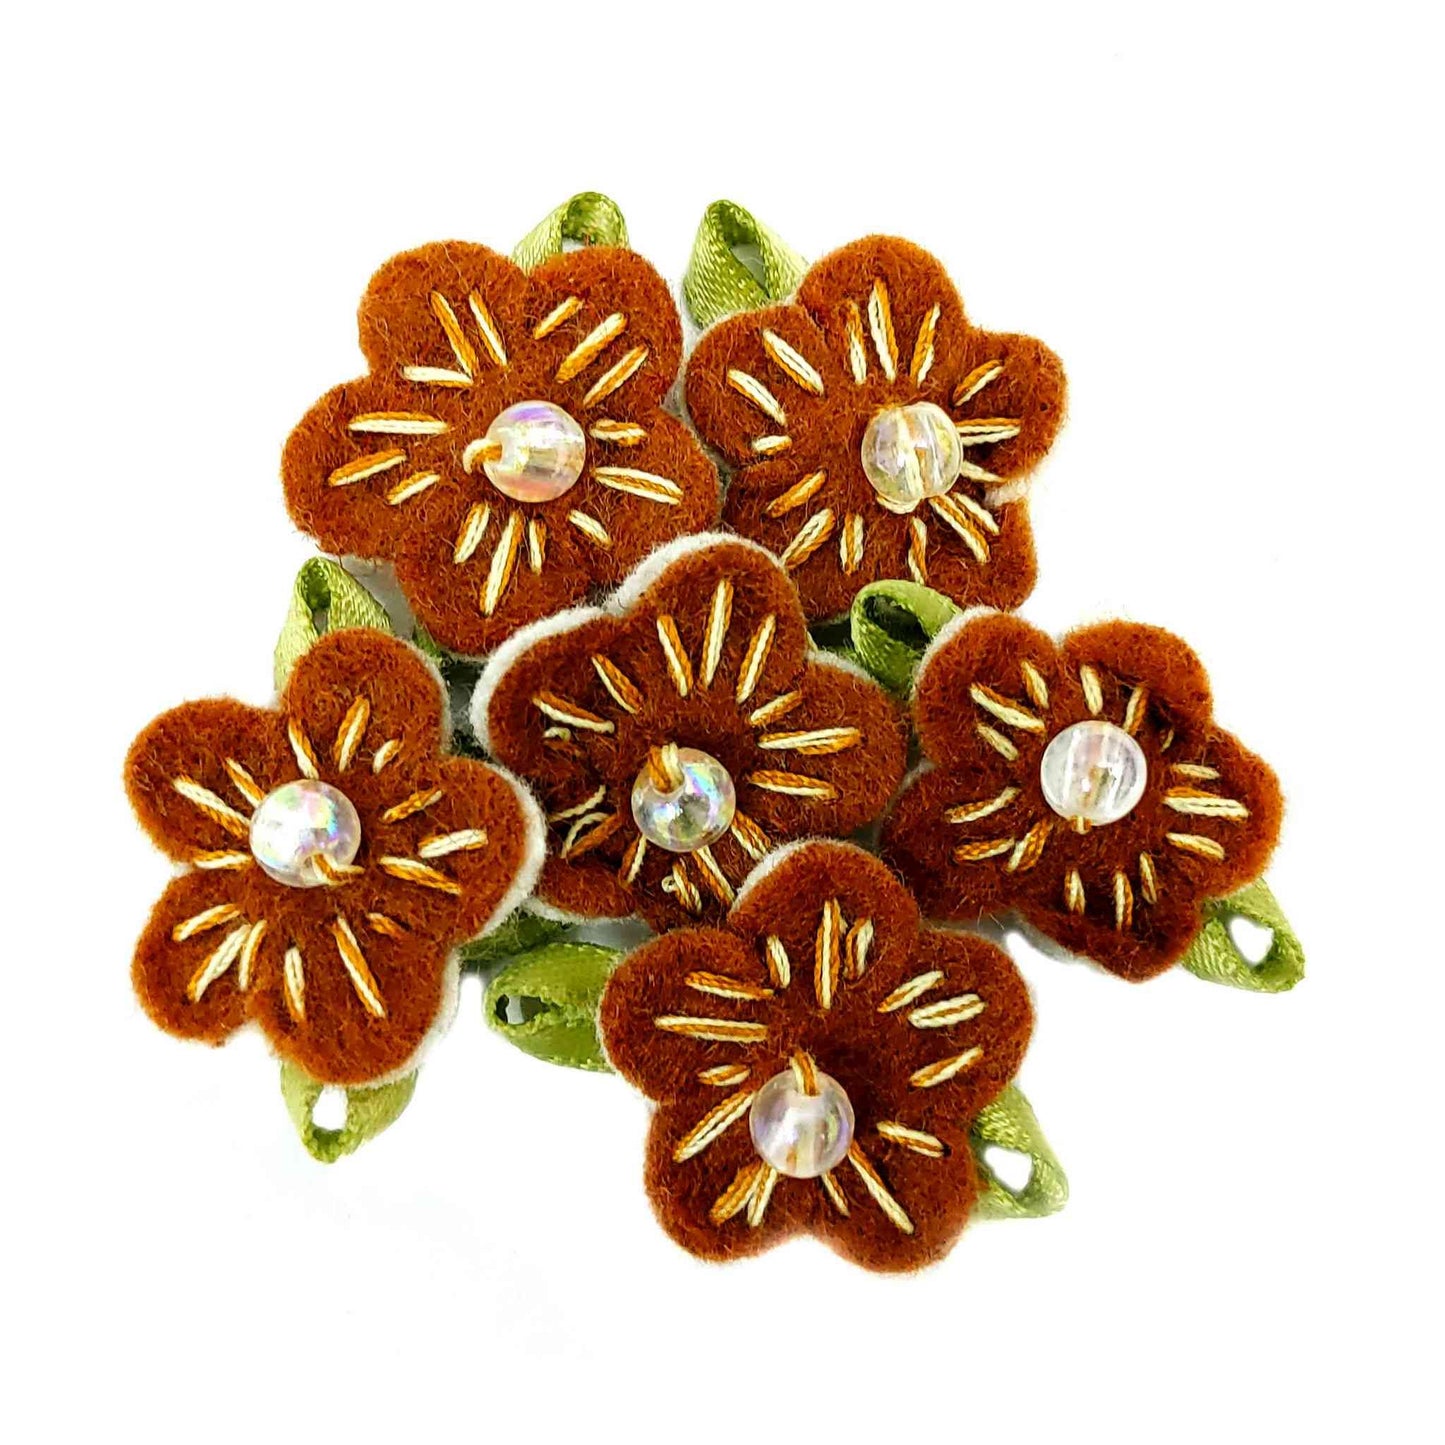 Indian Petals Beautiful Fabric Small Flowers for DIY Craft, Trouseau Packing or Decoration (Bunch of 12) - Design 44, Saddle Brown - Indian Petals